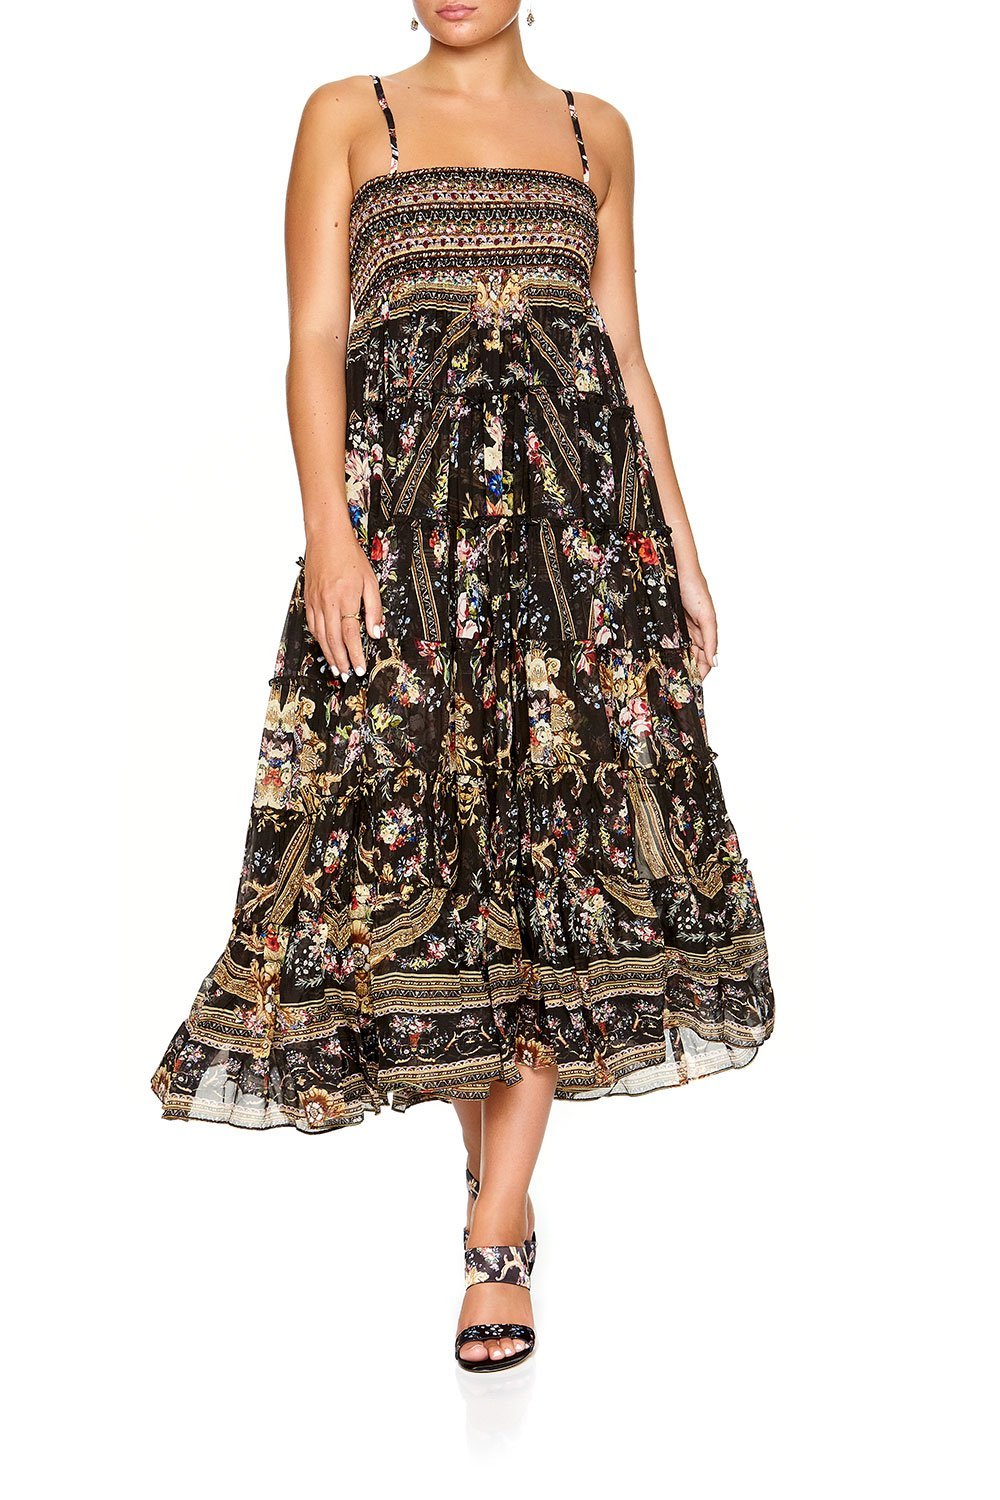 SHEER TIERED CIRCLE SKIRT FRIEND IN FLORA